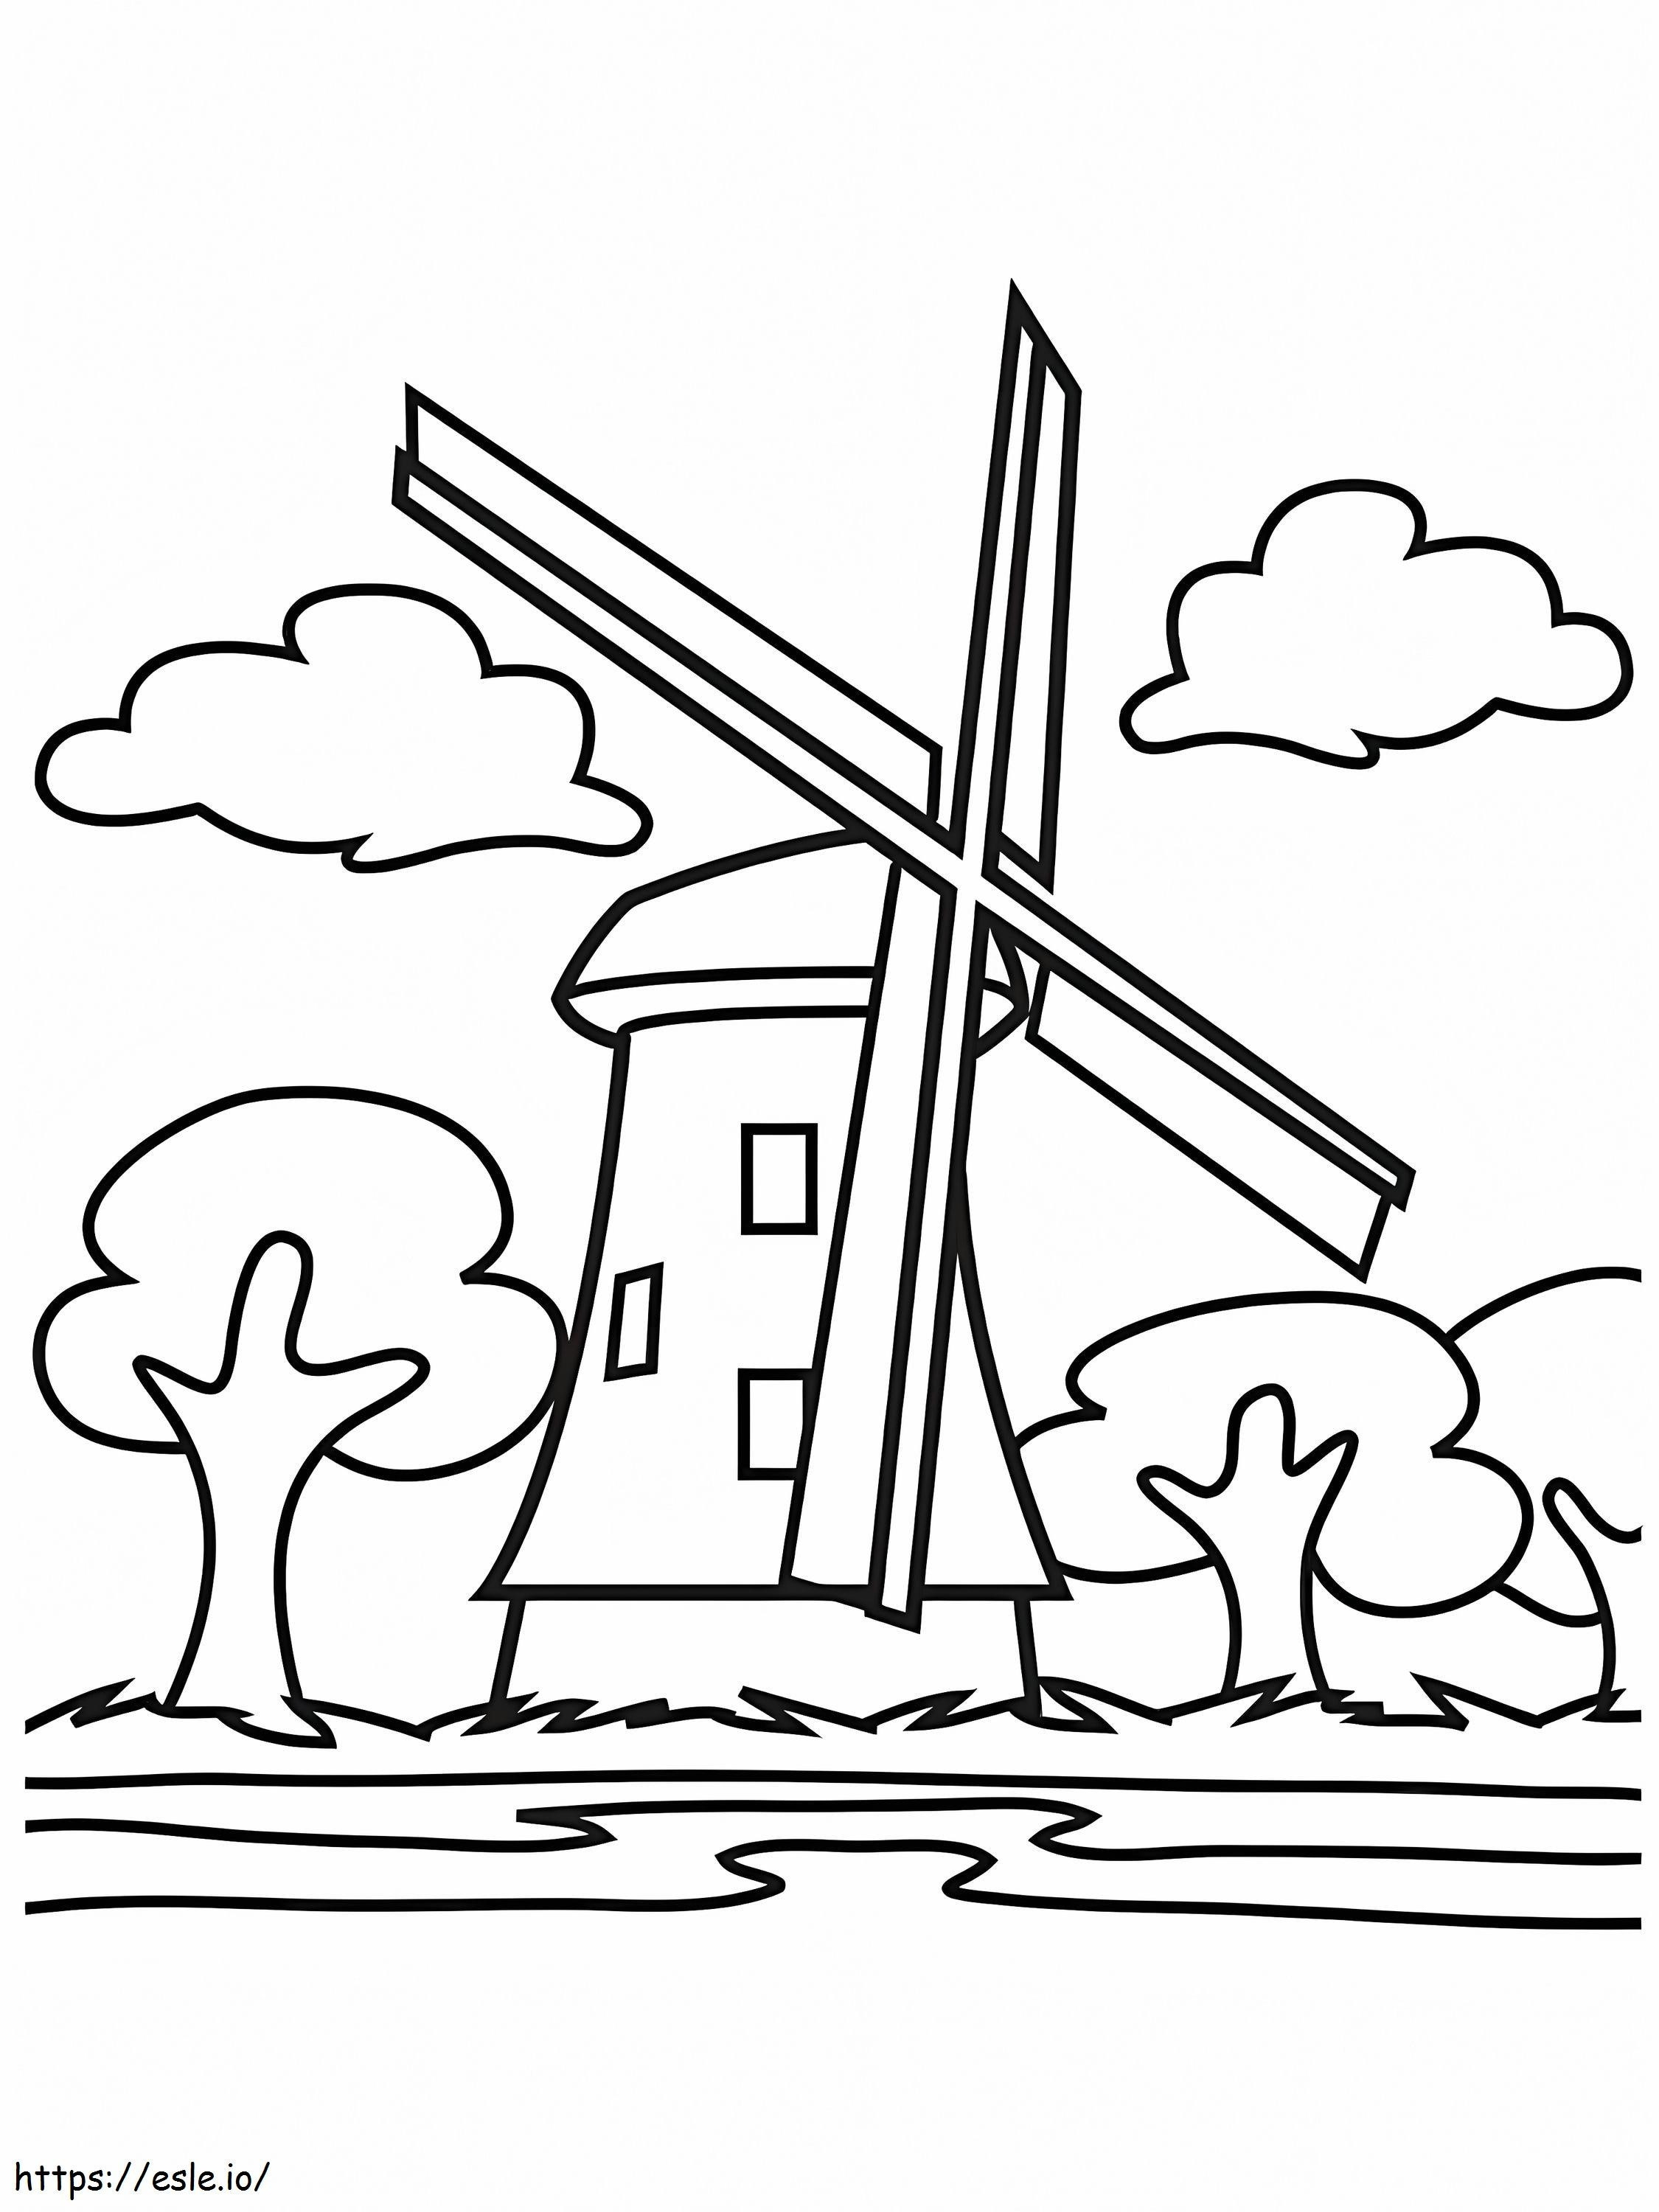 Windmill 6 coloring page